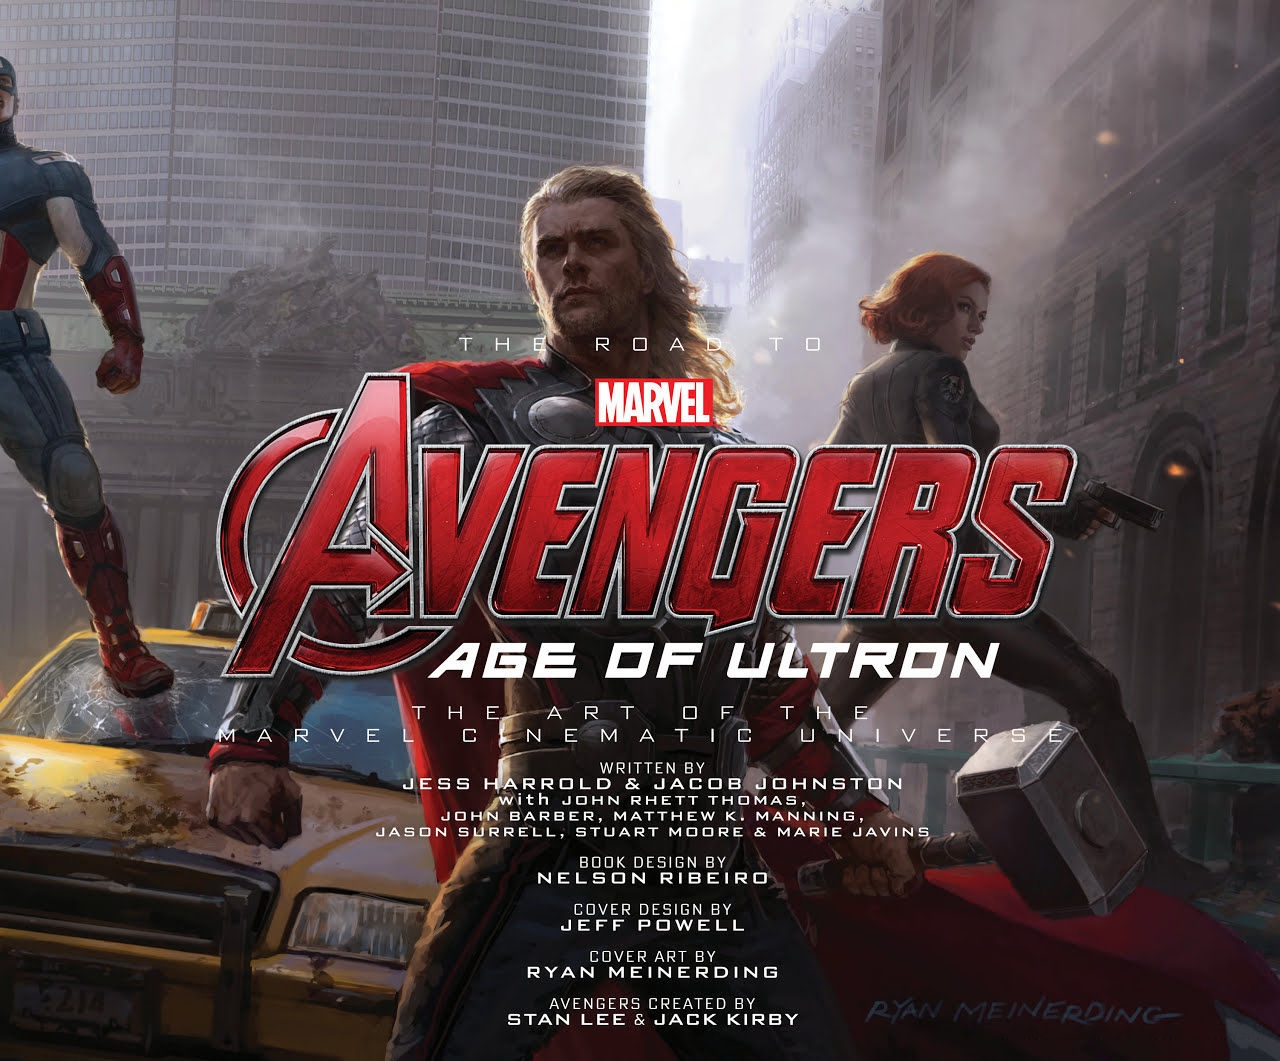 The Road to Marvel's Avengers Age of Ultron - The Art of the Marvel Cinematic Universe 3